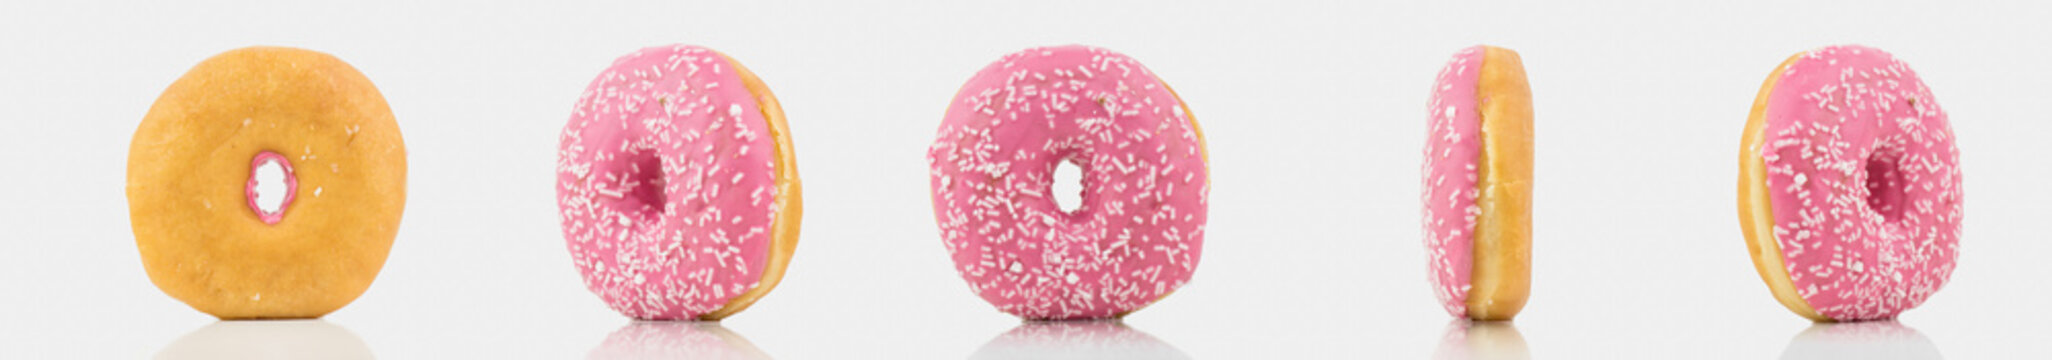 Bunch Of Delicious Pink Colored Donut On White Background With White Chocolate On It.Isolated